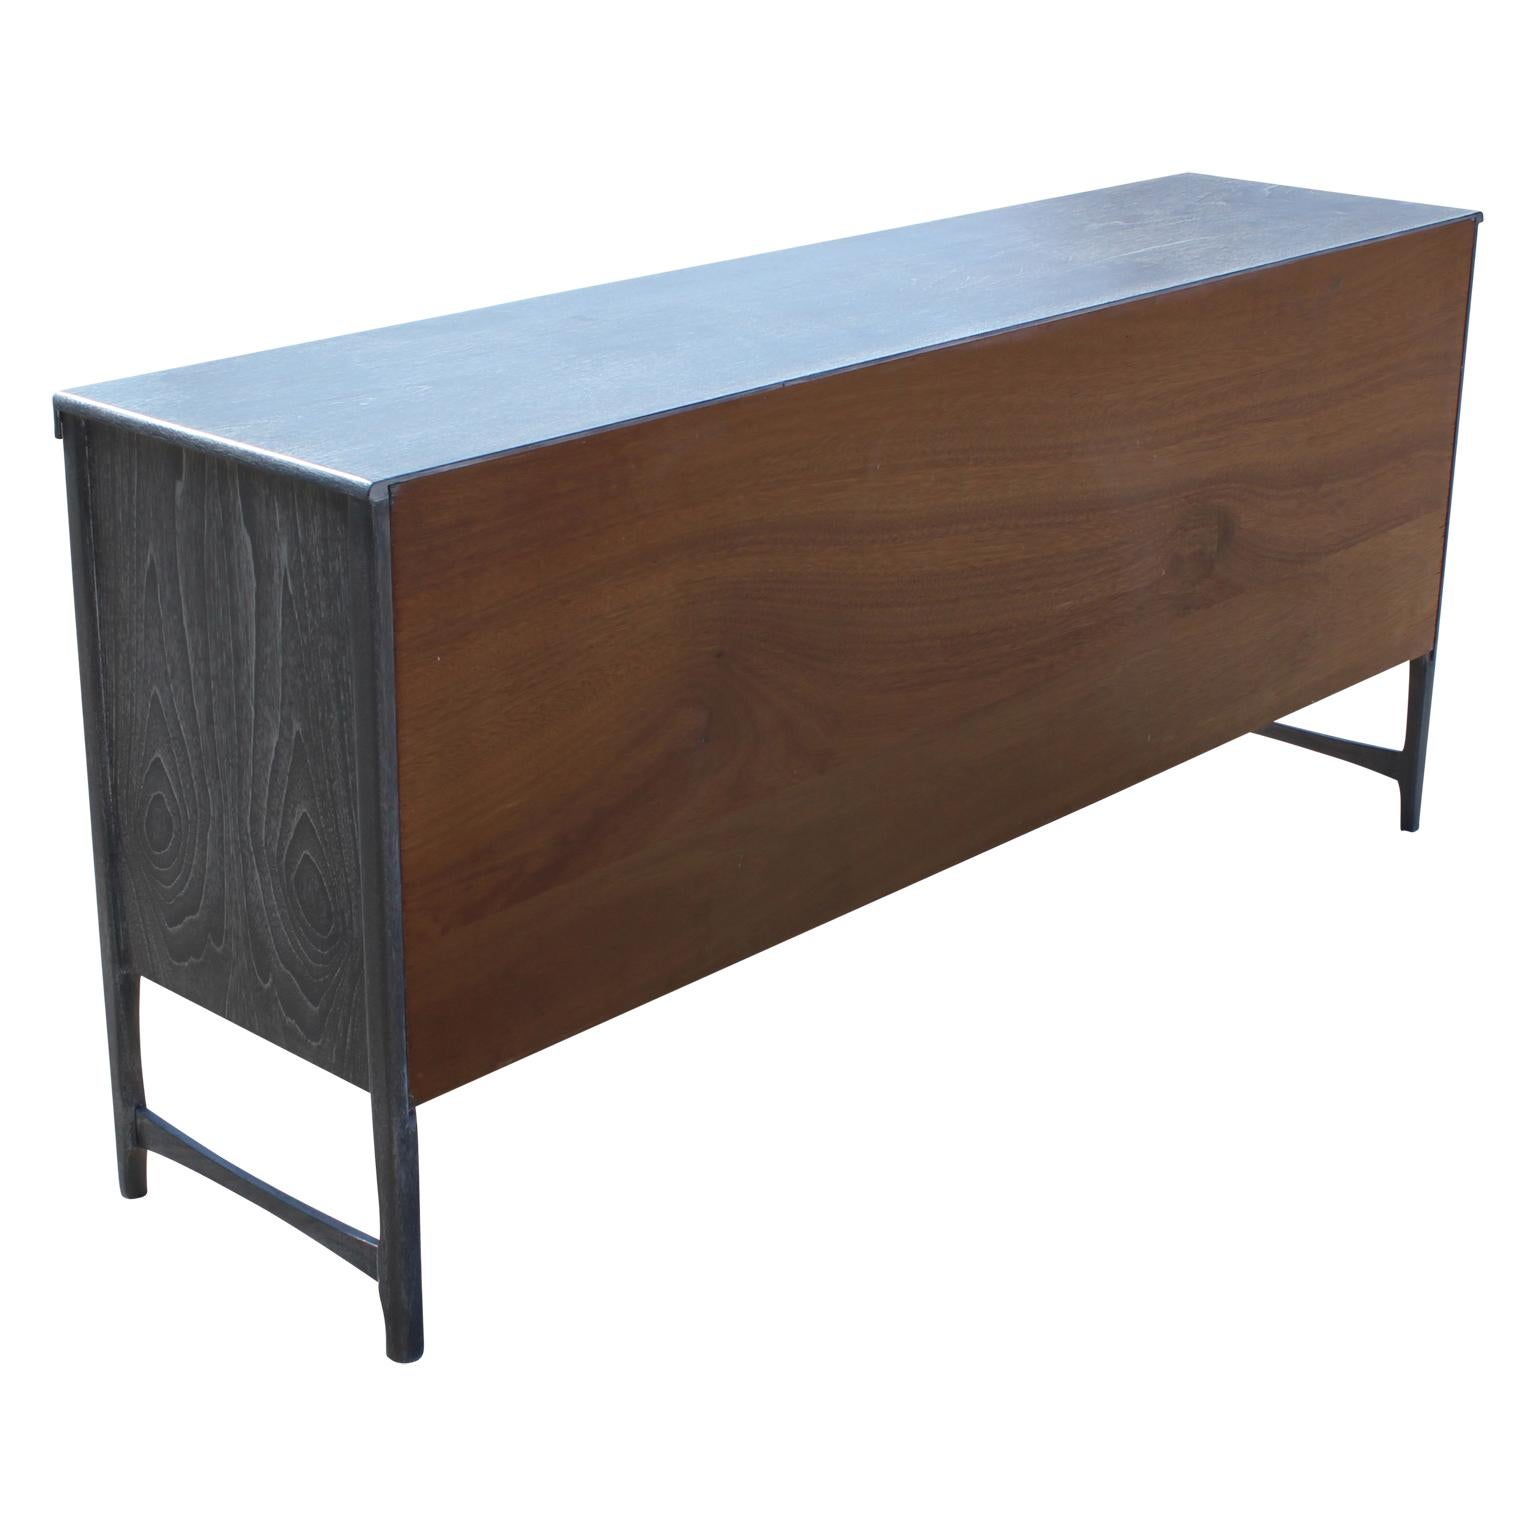 Mid-20th Century Modern Hollywood Regency Sideboard with a Grey Cerused Finish and Brass Hardware